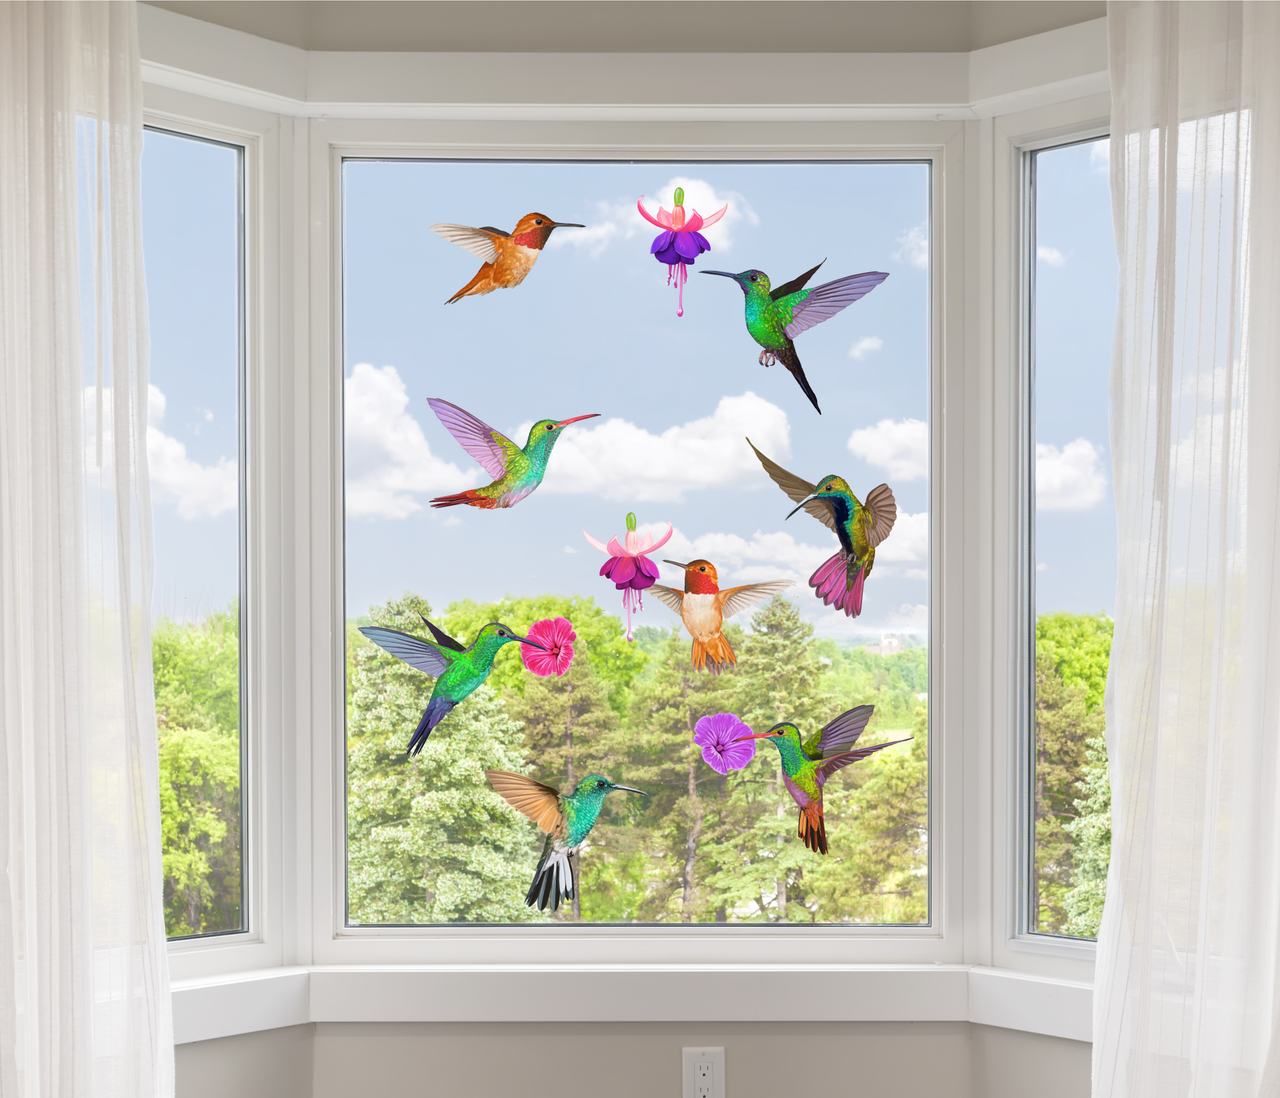 12 Hummingbird Window Clings Non Adhesive Vinyl Stickers Beautiful Glass  Safety Sticker the Decals can Deter